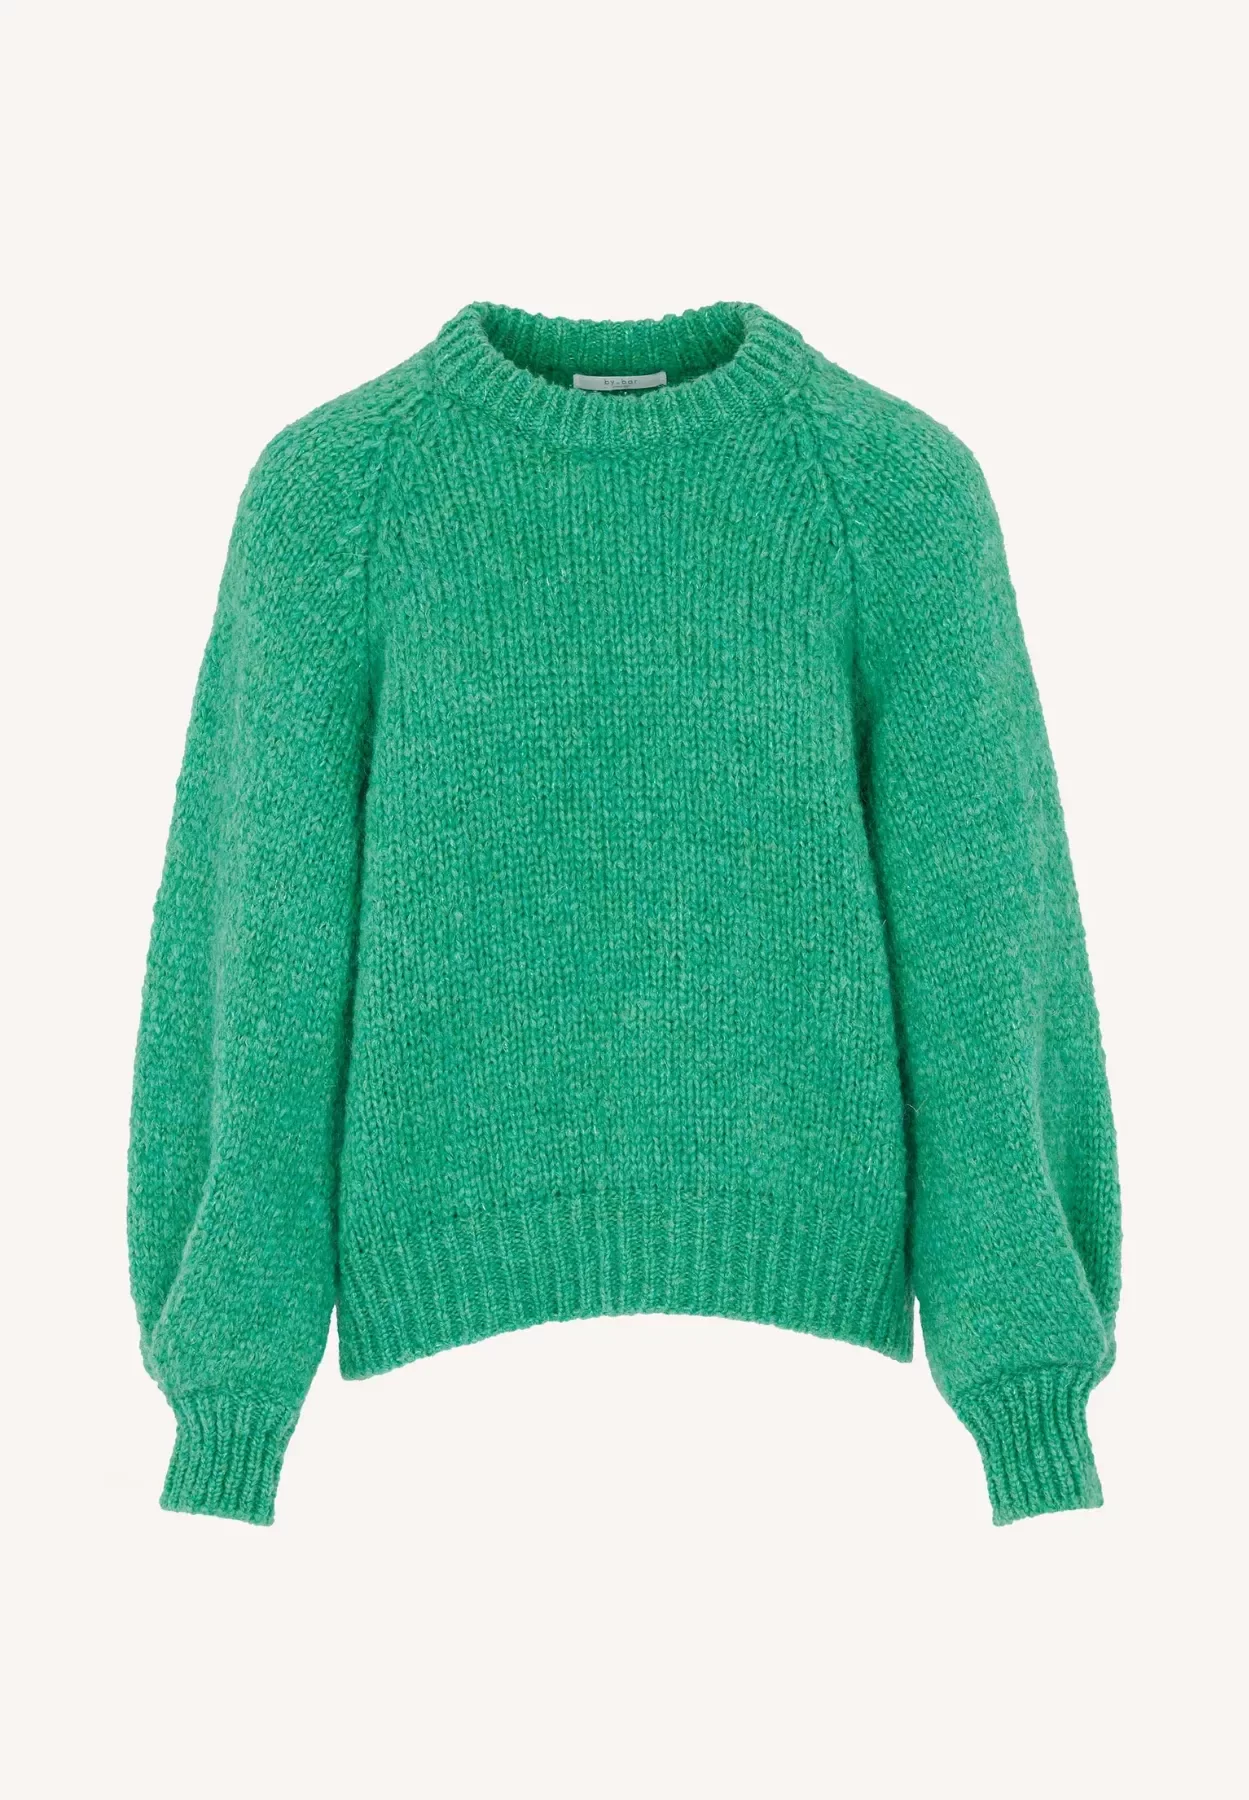 by-bar amsterdam - lucia pullover - light mint 4